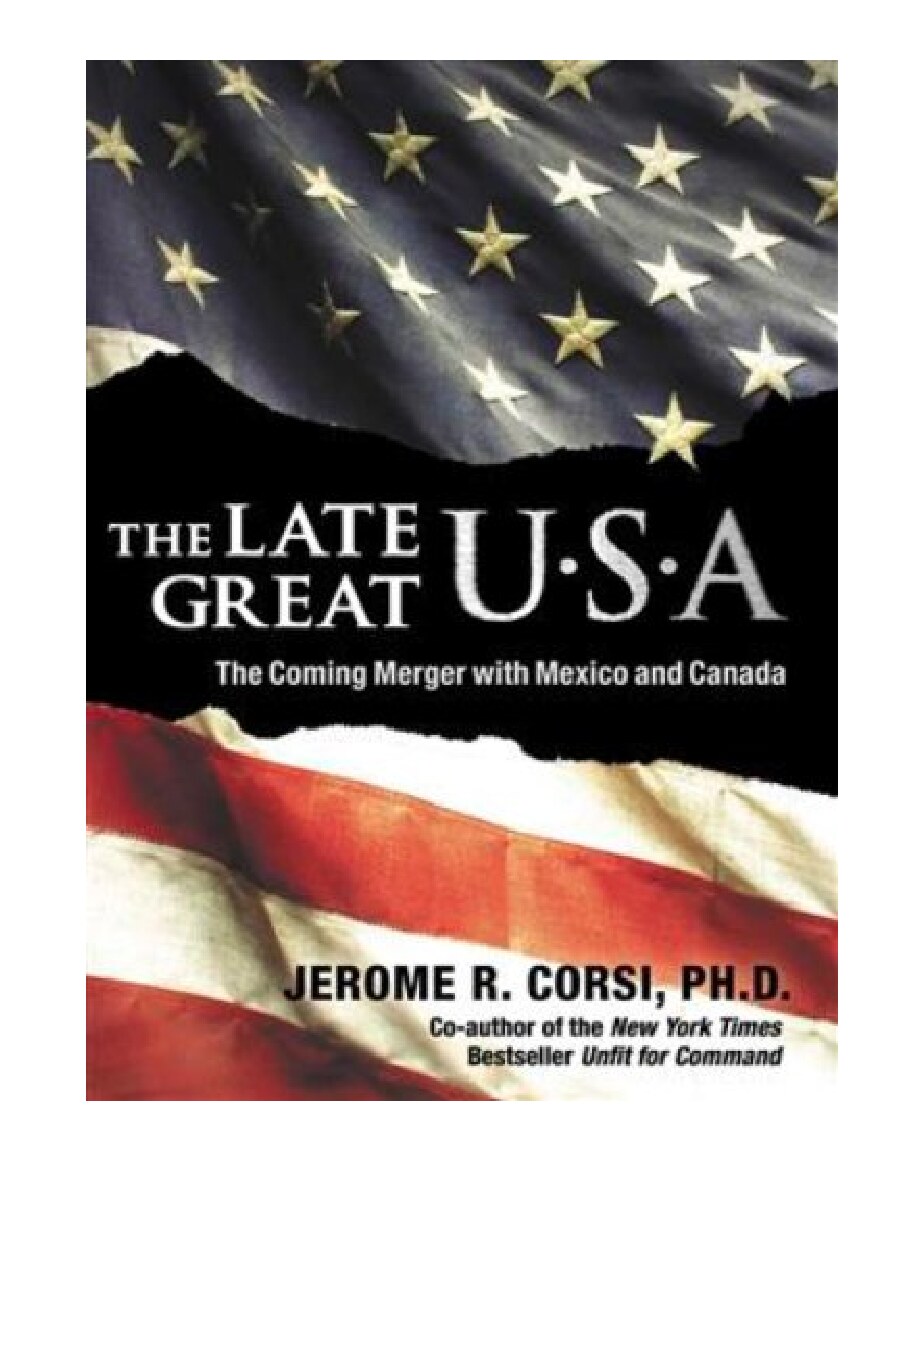 The Late Great USA: The Coming Merger With Mexico and Canada